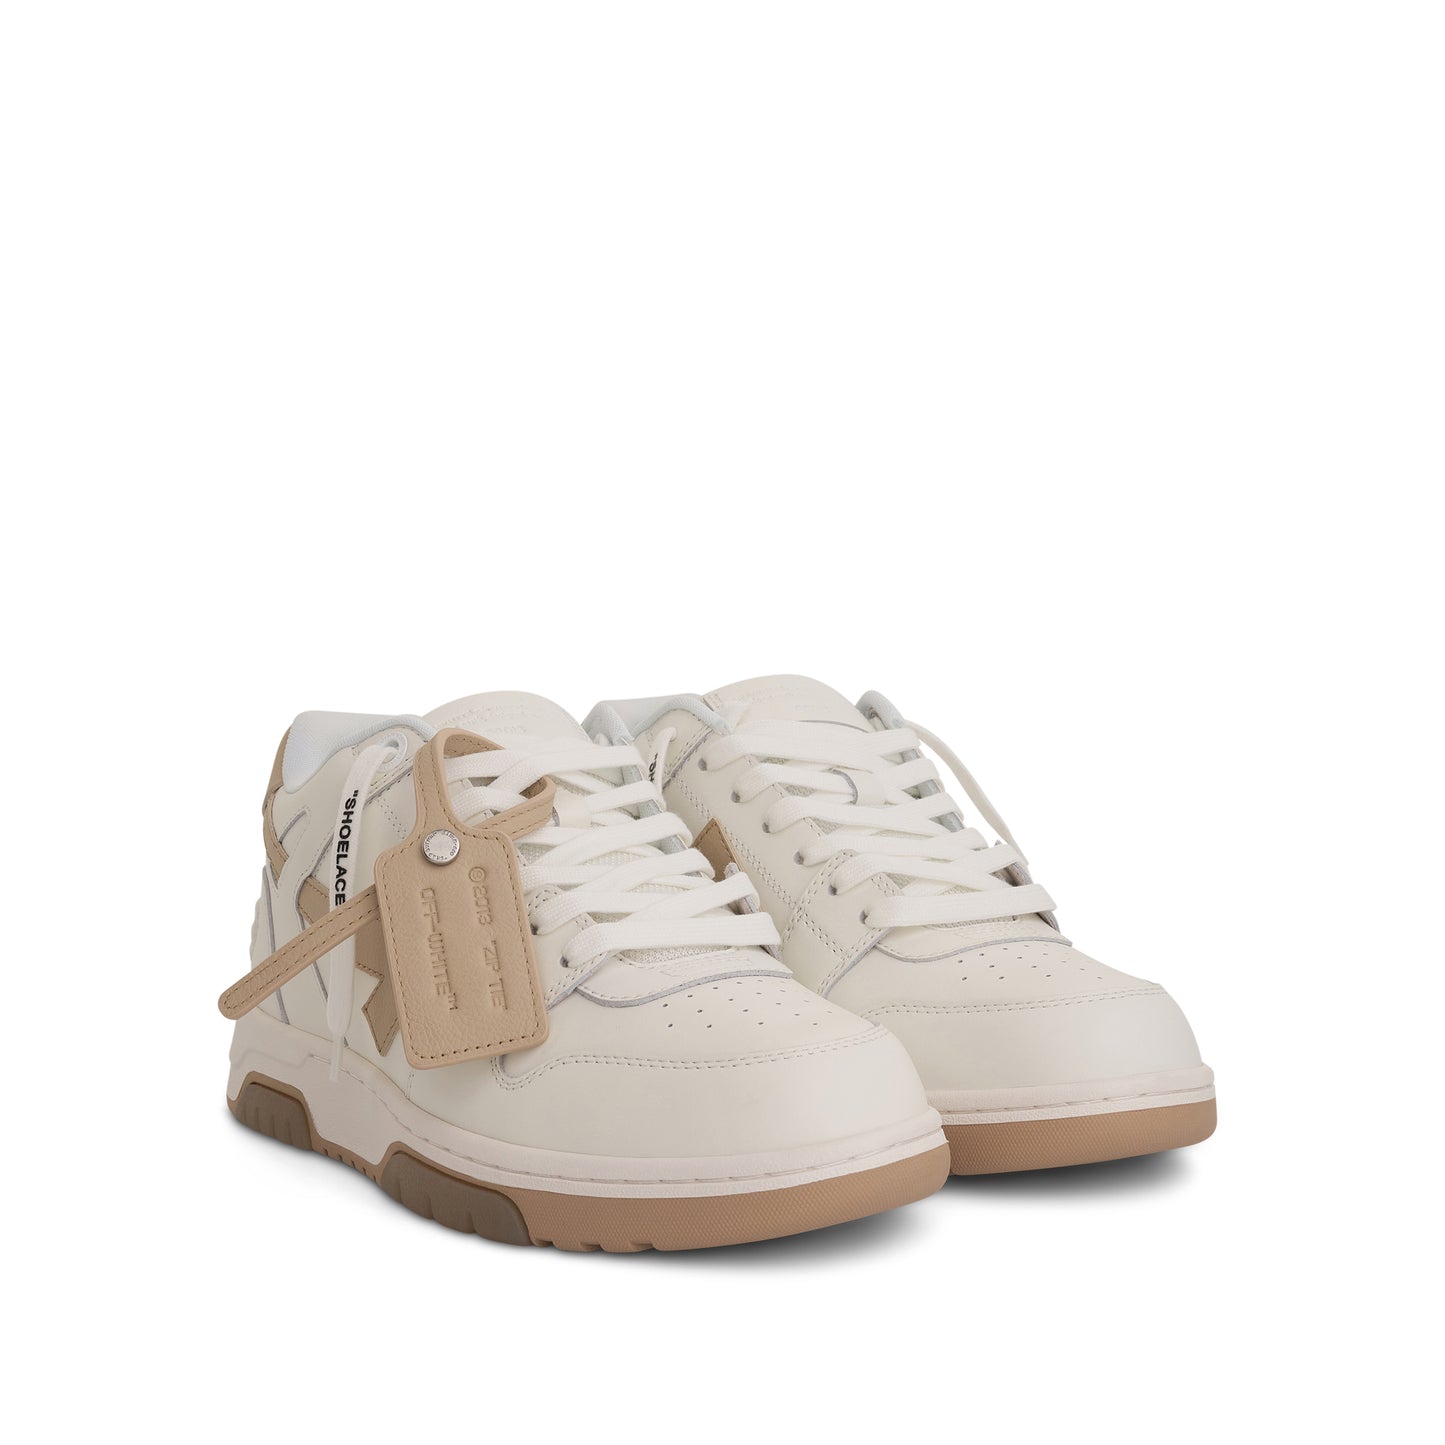 Out Of Office Calf Leather Sneaker in White/Sand